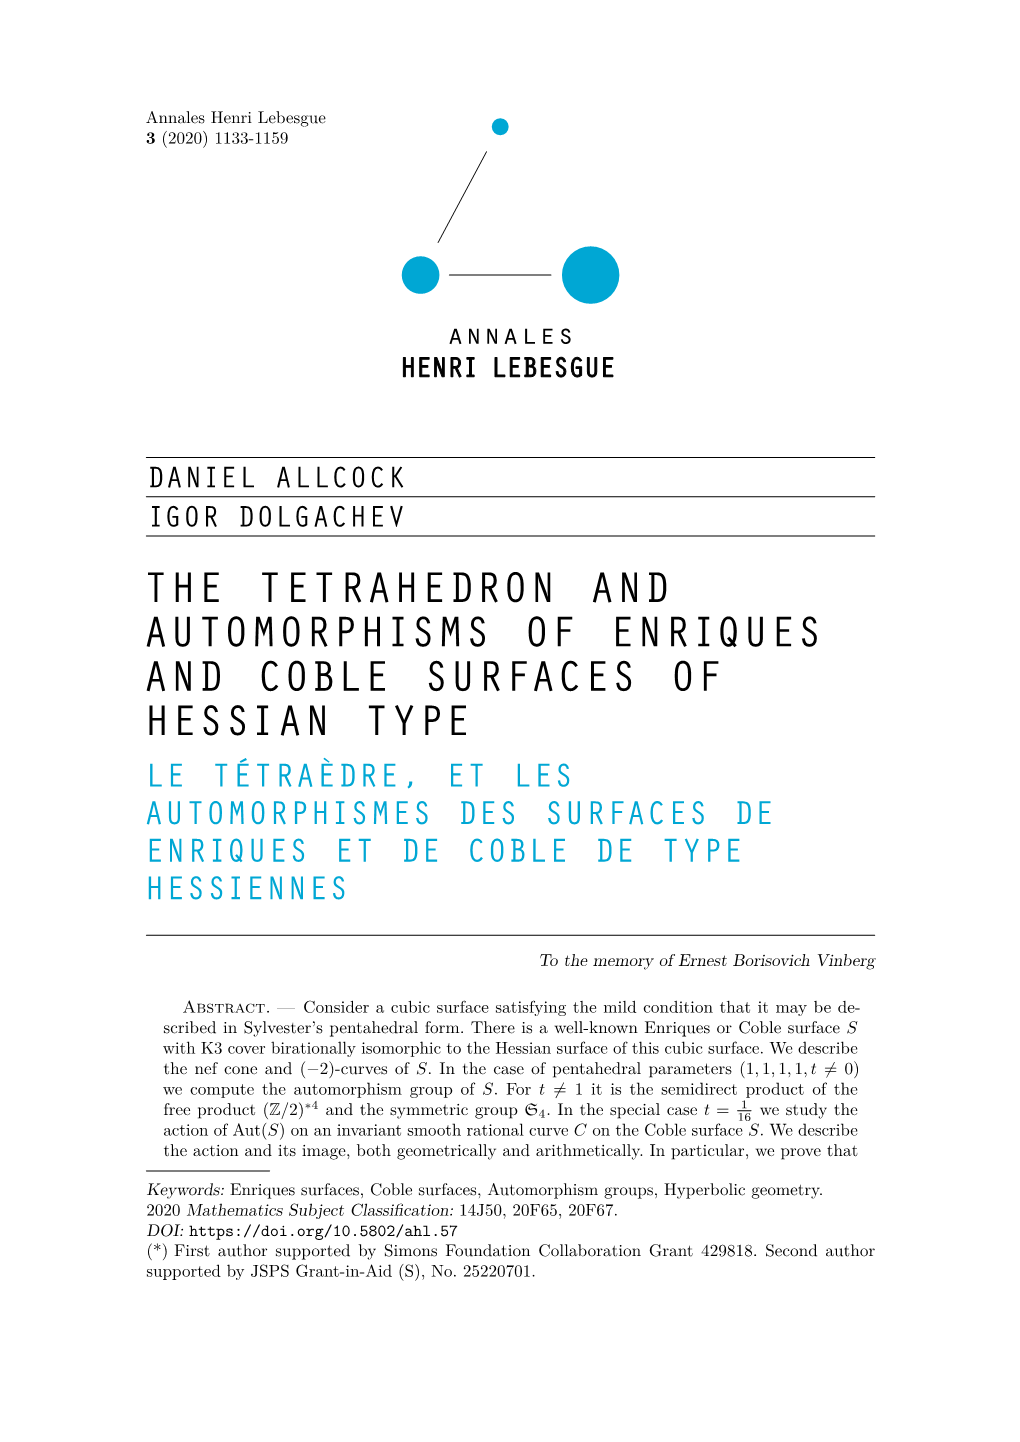 The Tetrahedron and Automorphisms of Enriques and Coble Surfaces Of